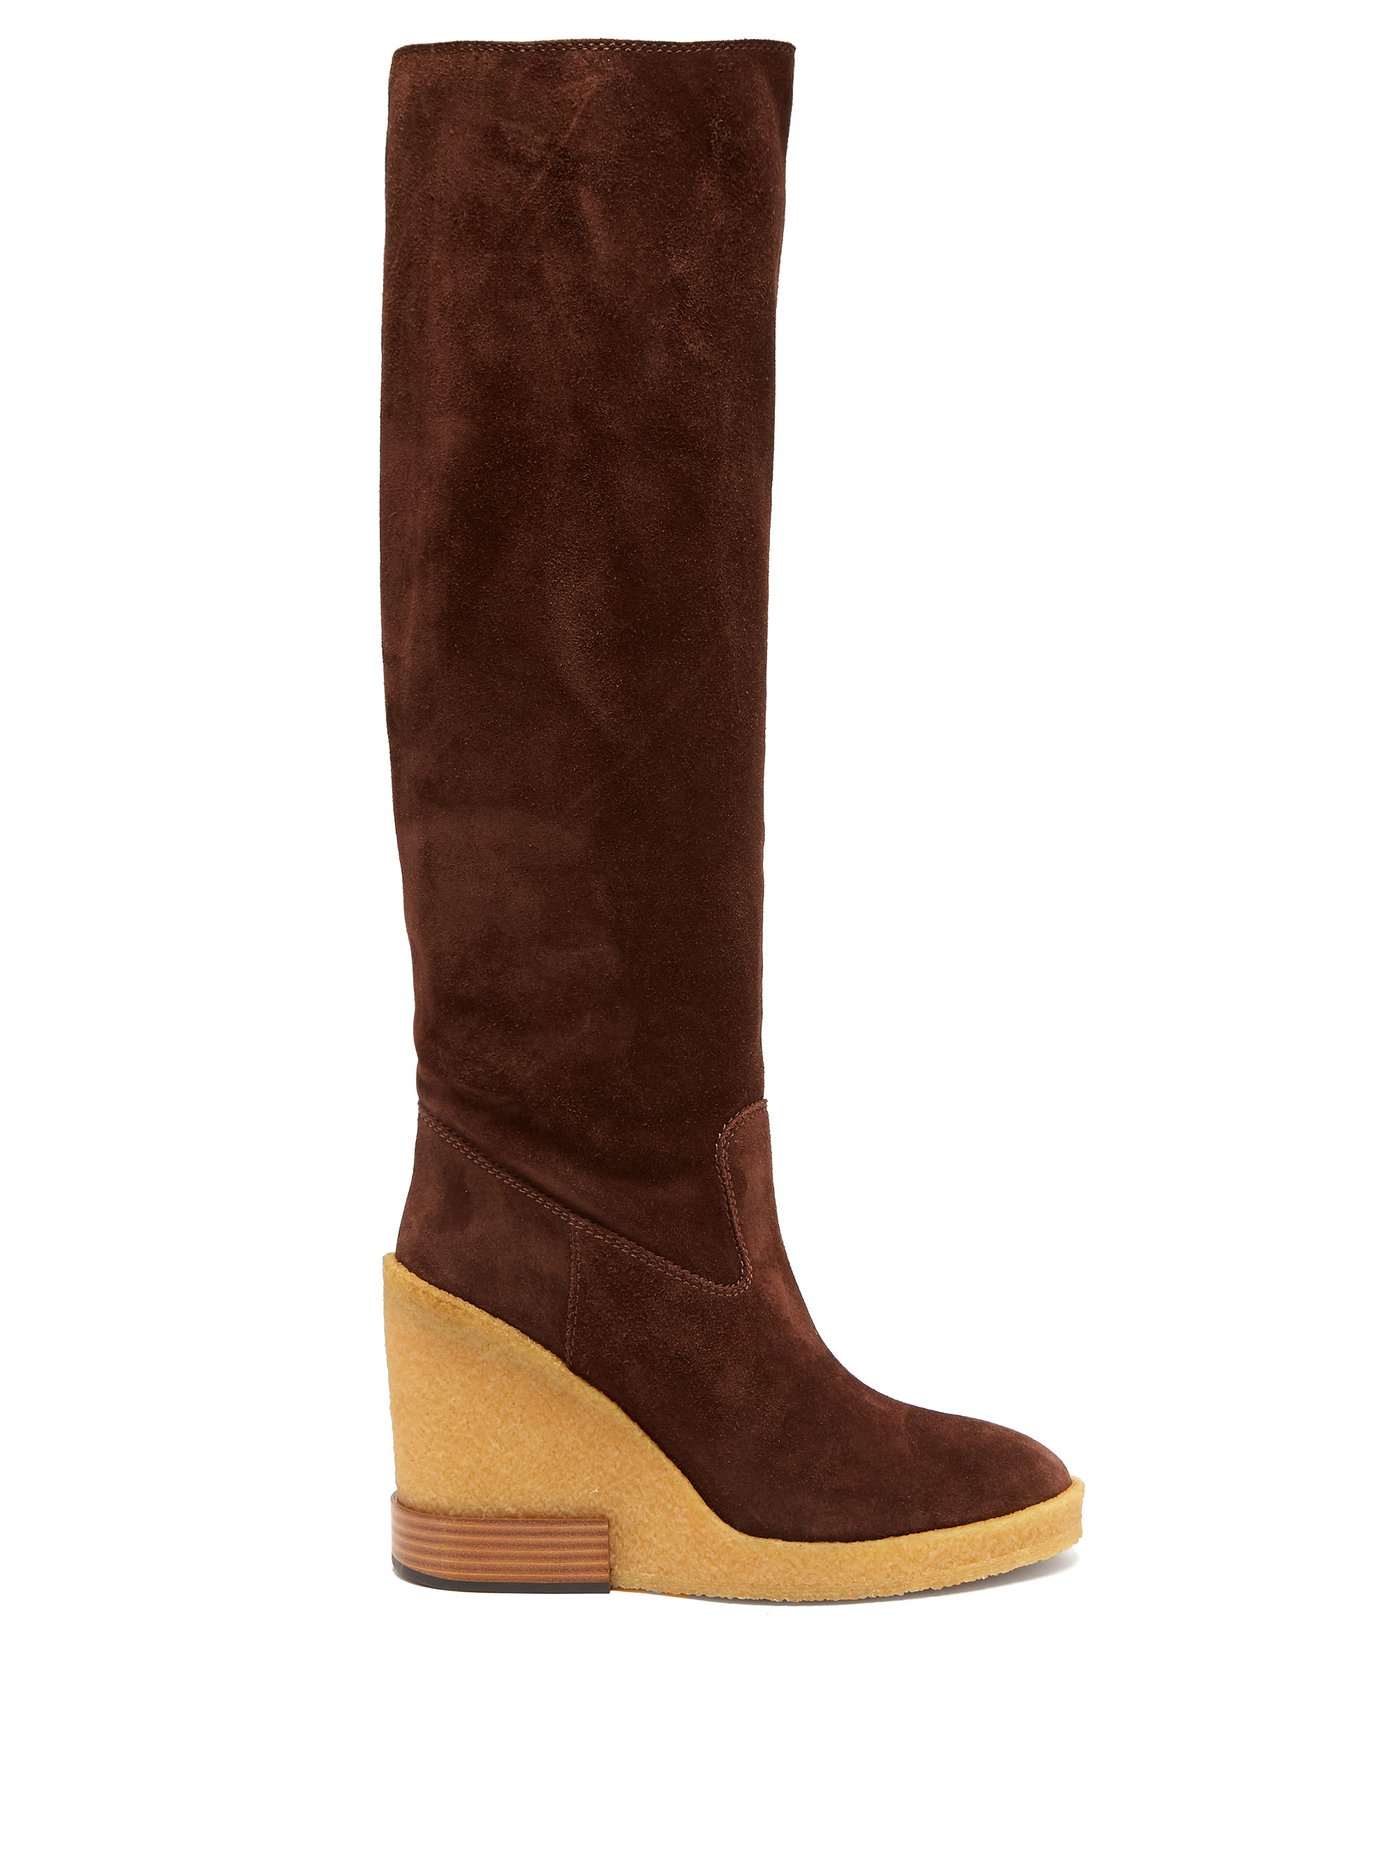 Knee-high suede wedge boots | Tod's 